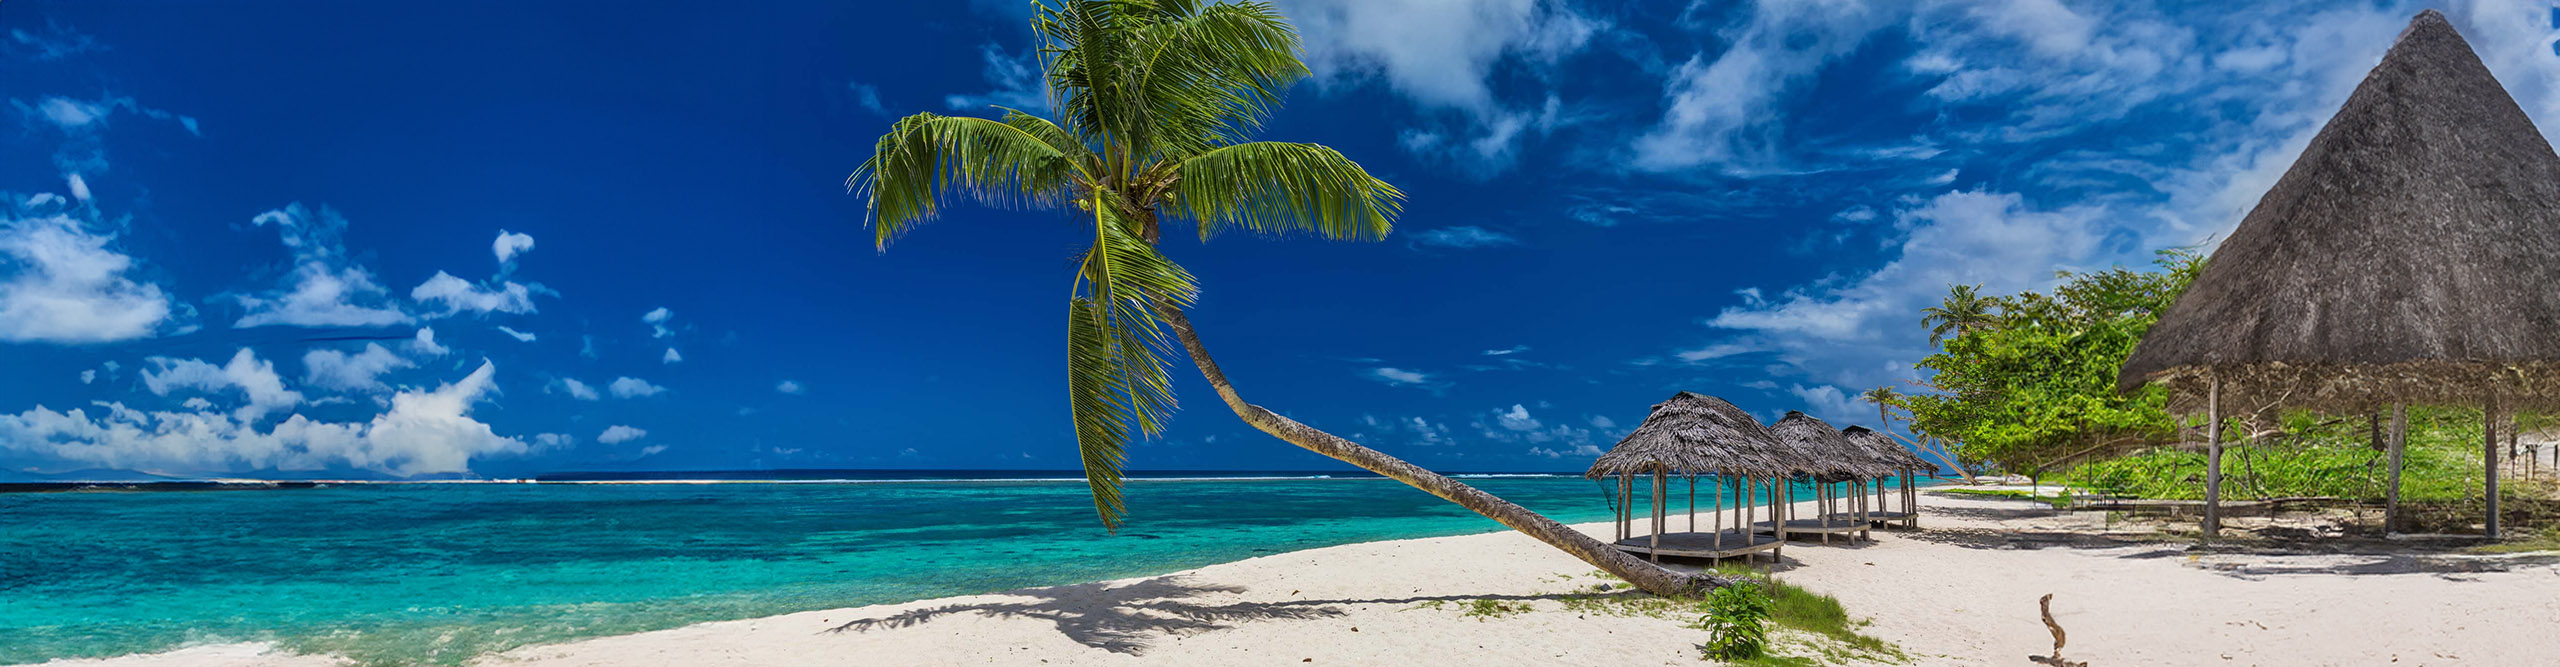 A beautiful beach with palm tree, white sand and clear blue water, Samoa